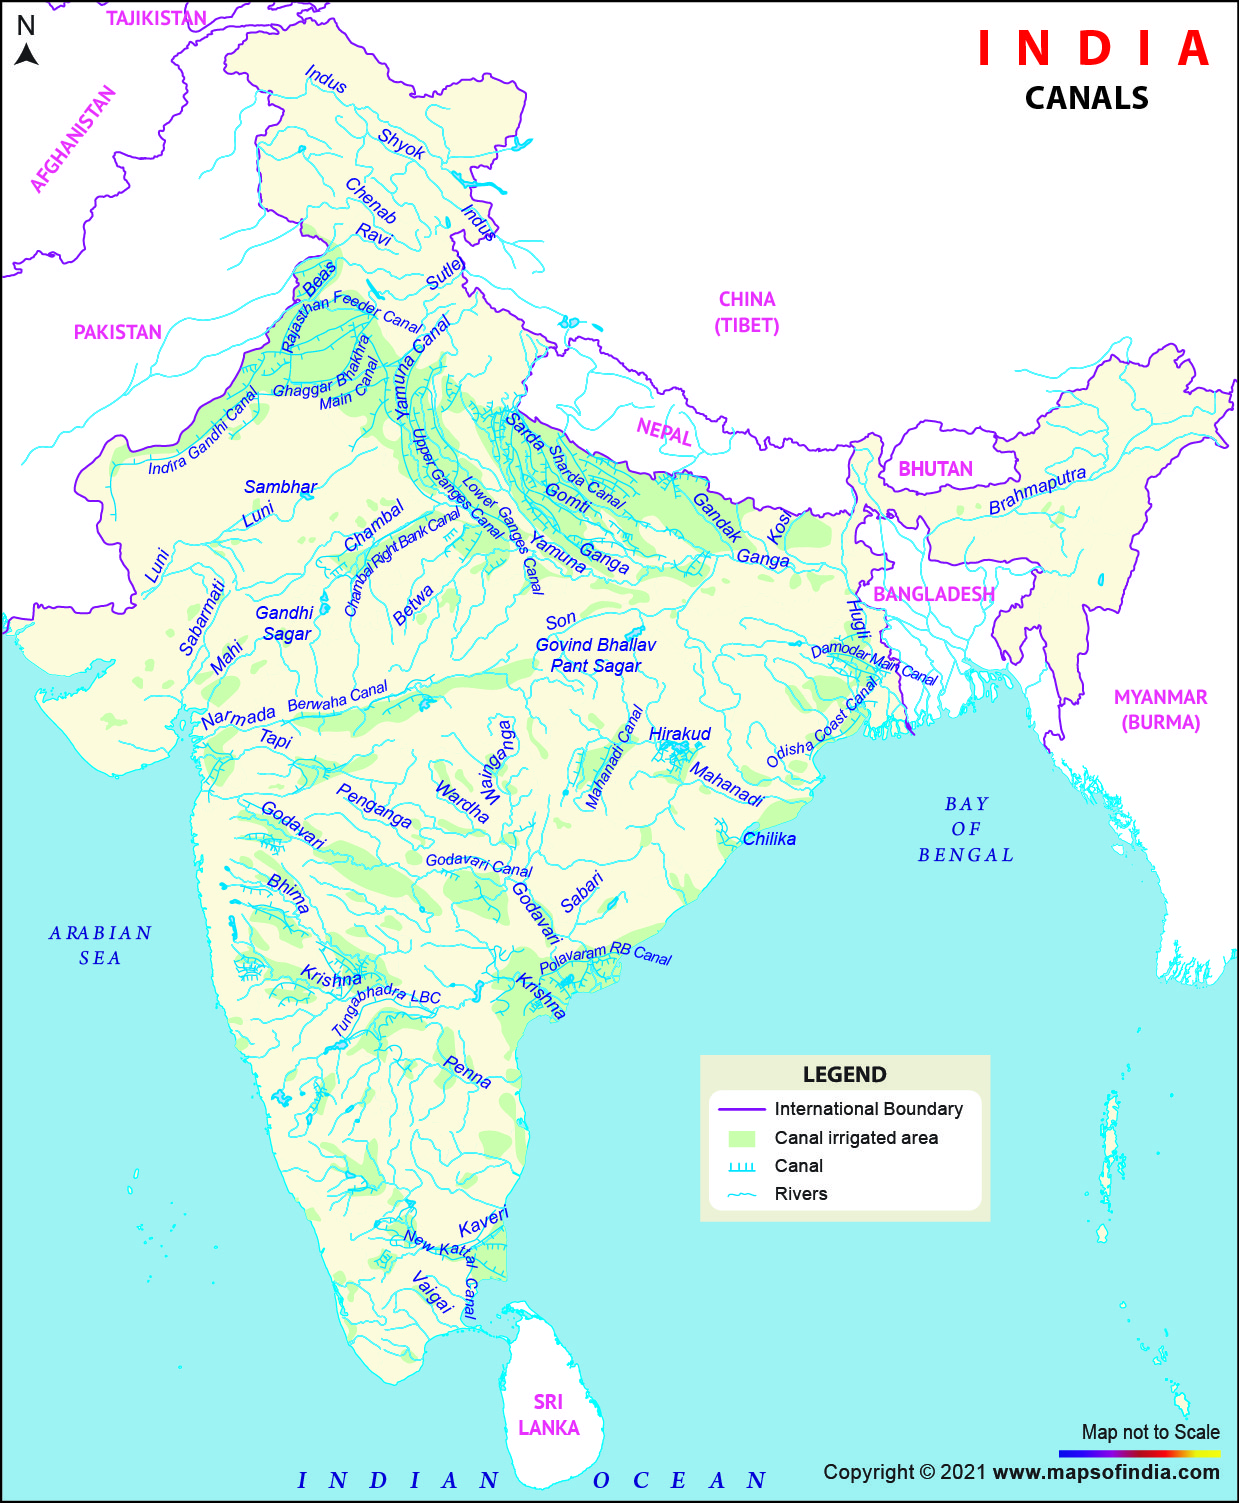 India canals Map